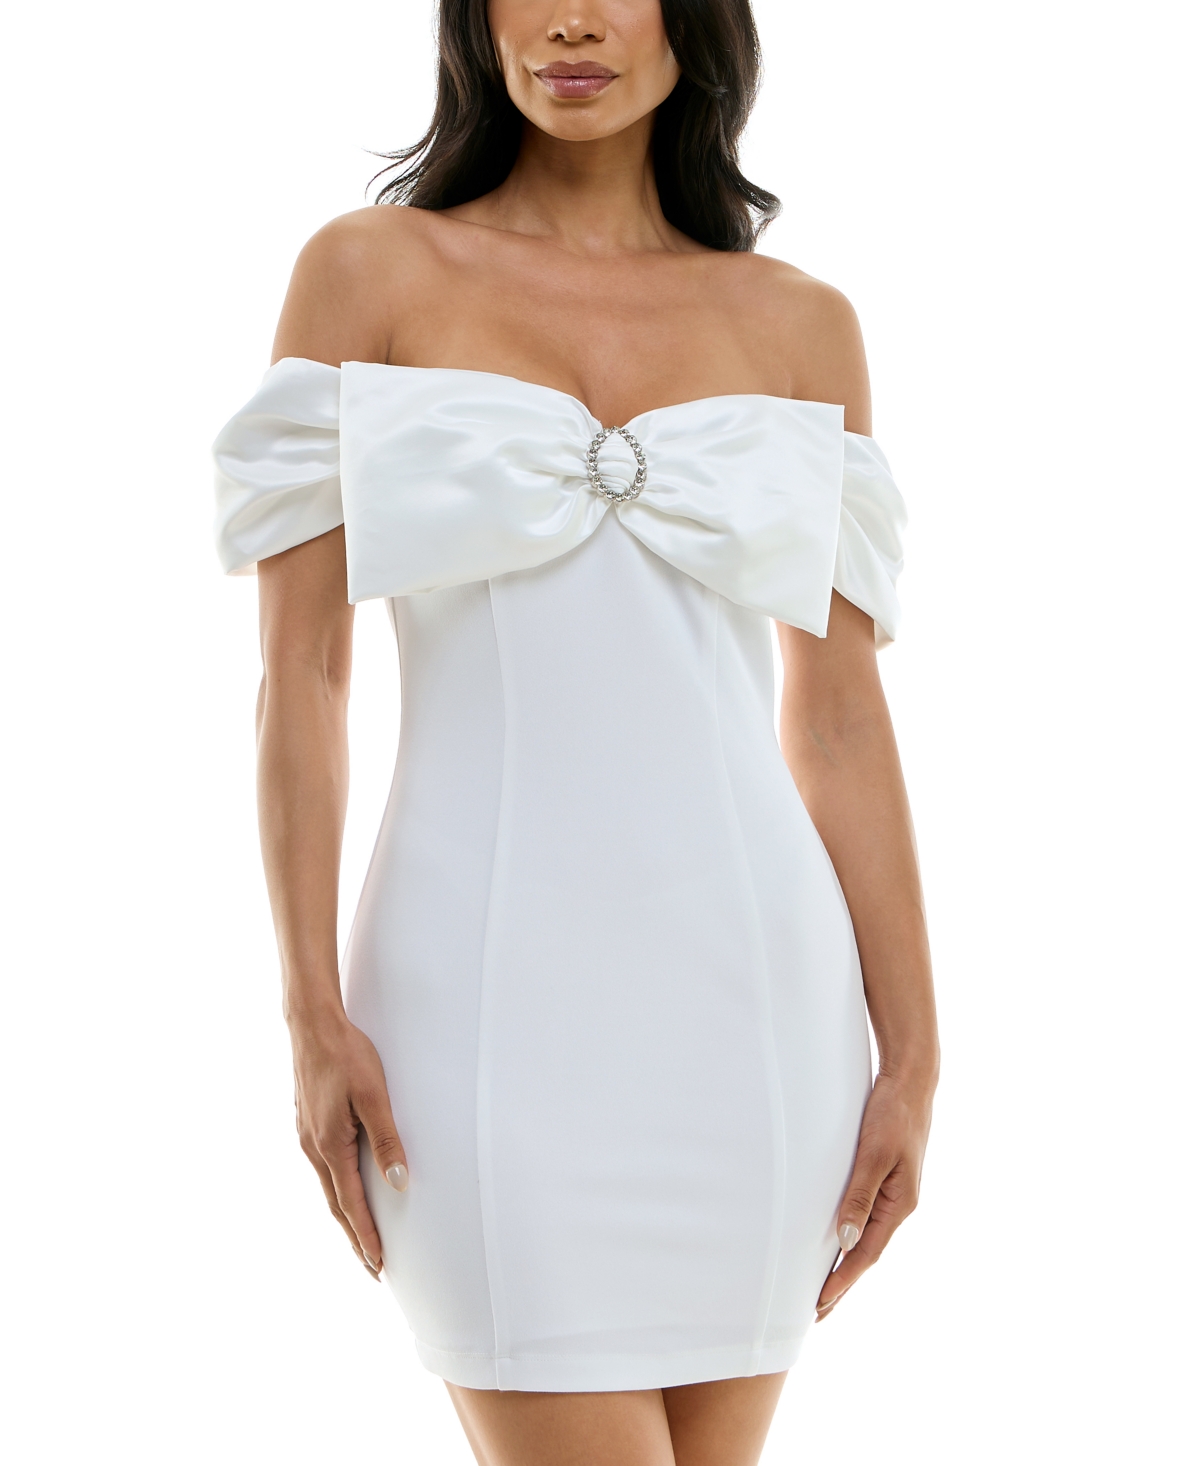 Juniors' Off-The-Shoulder Bow-Neck Bodycon Dress - Wht/cry